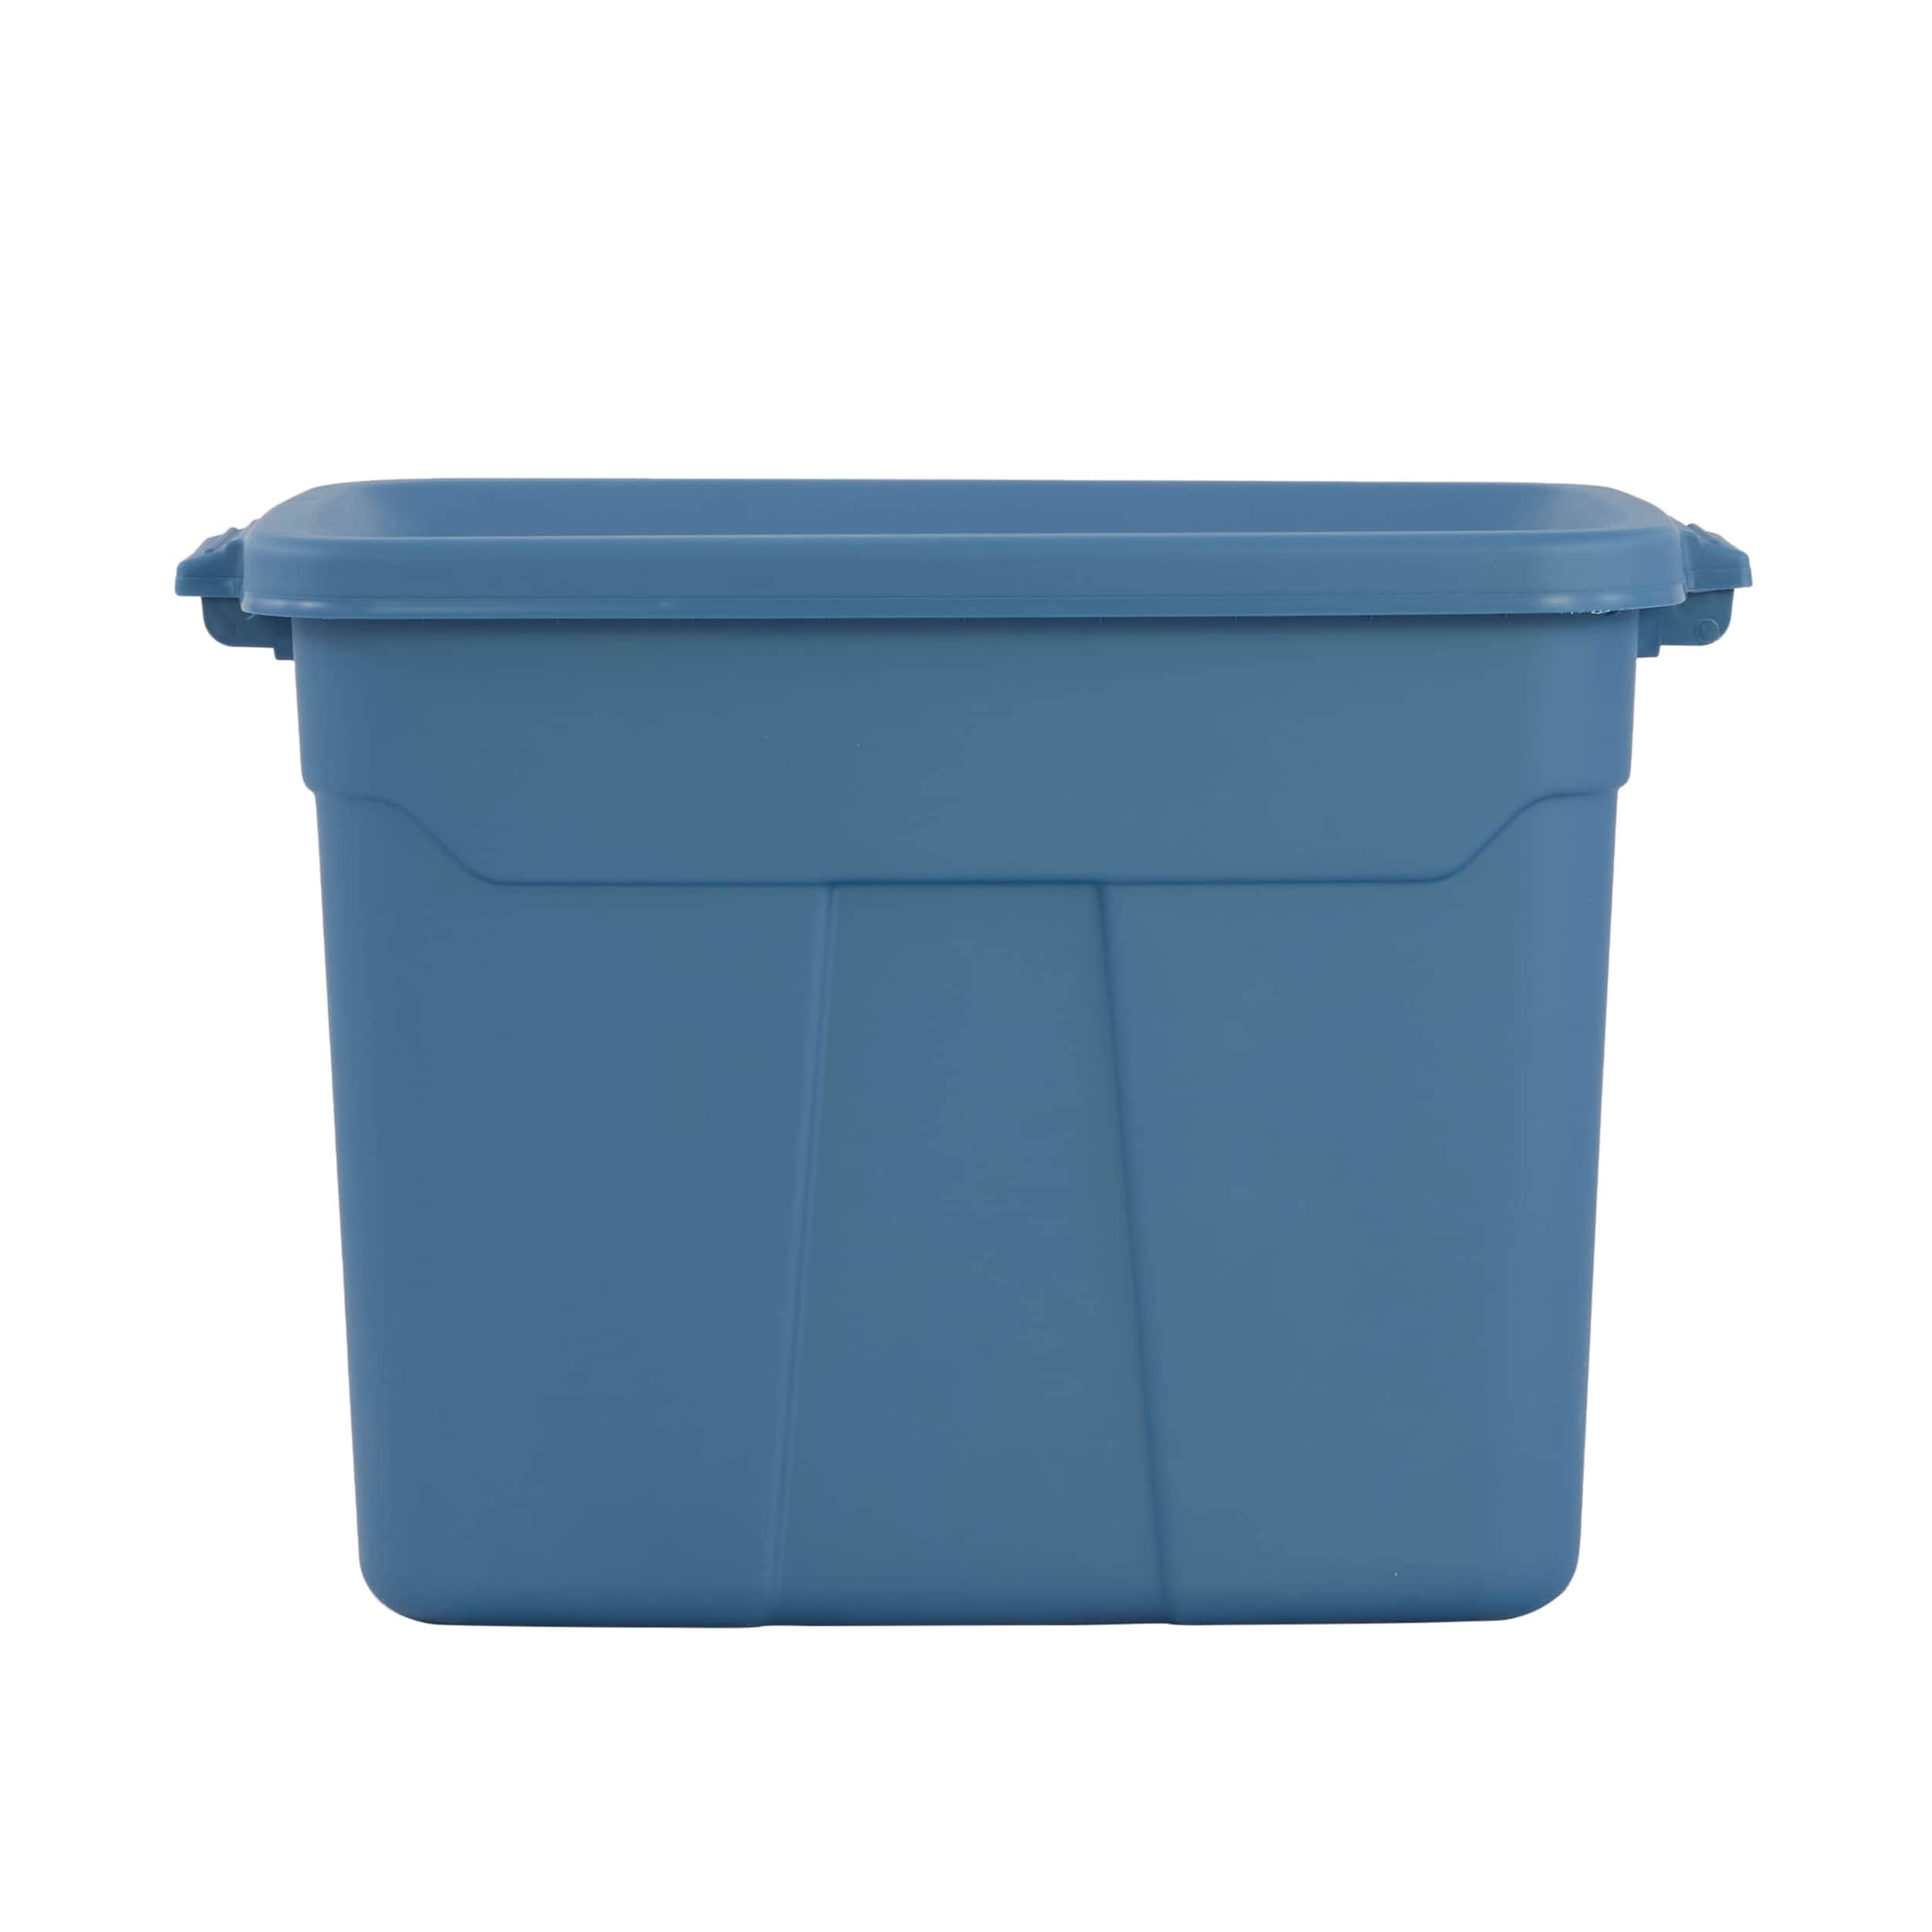 Extra Large Tote with 8″ Solid Rubber Wheels – Containment Corp